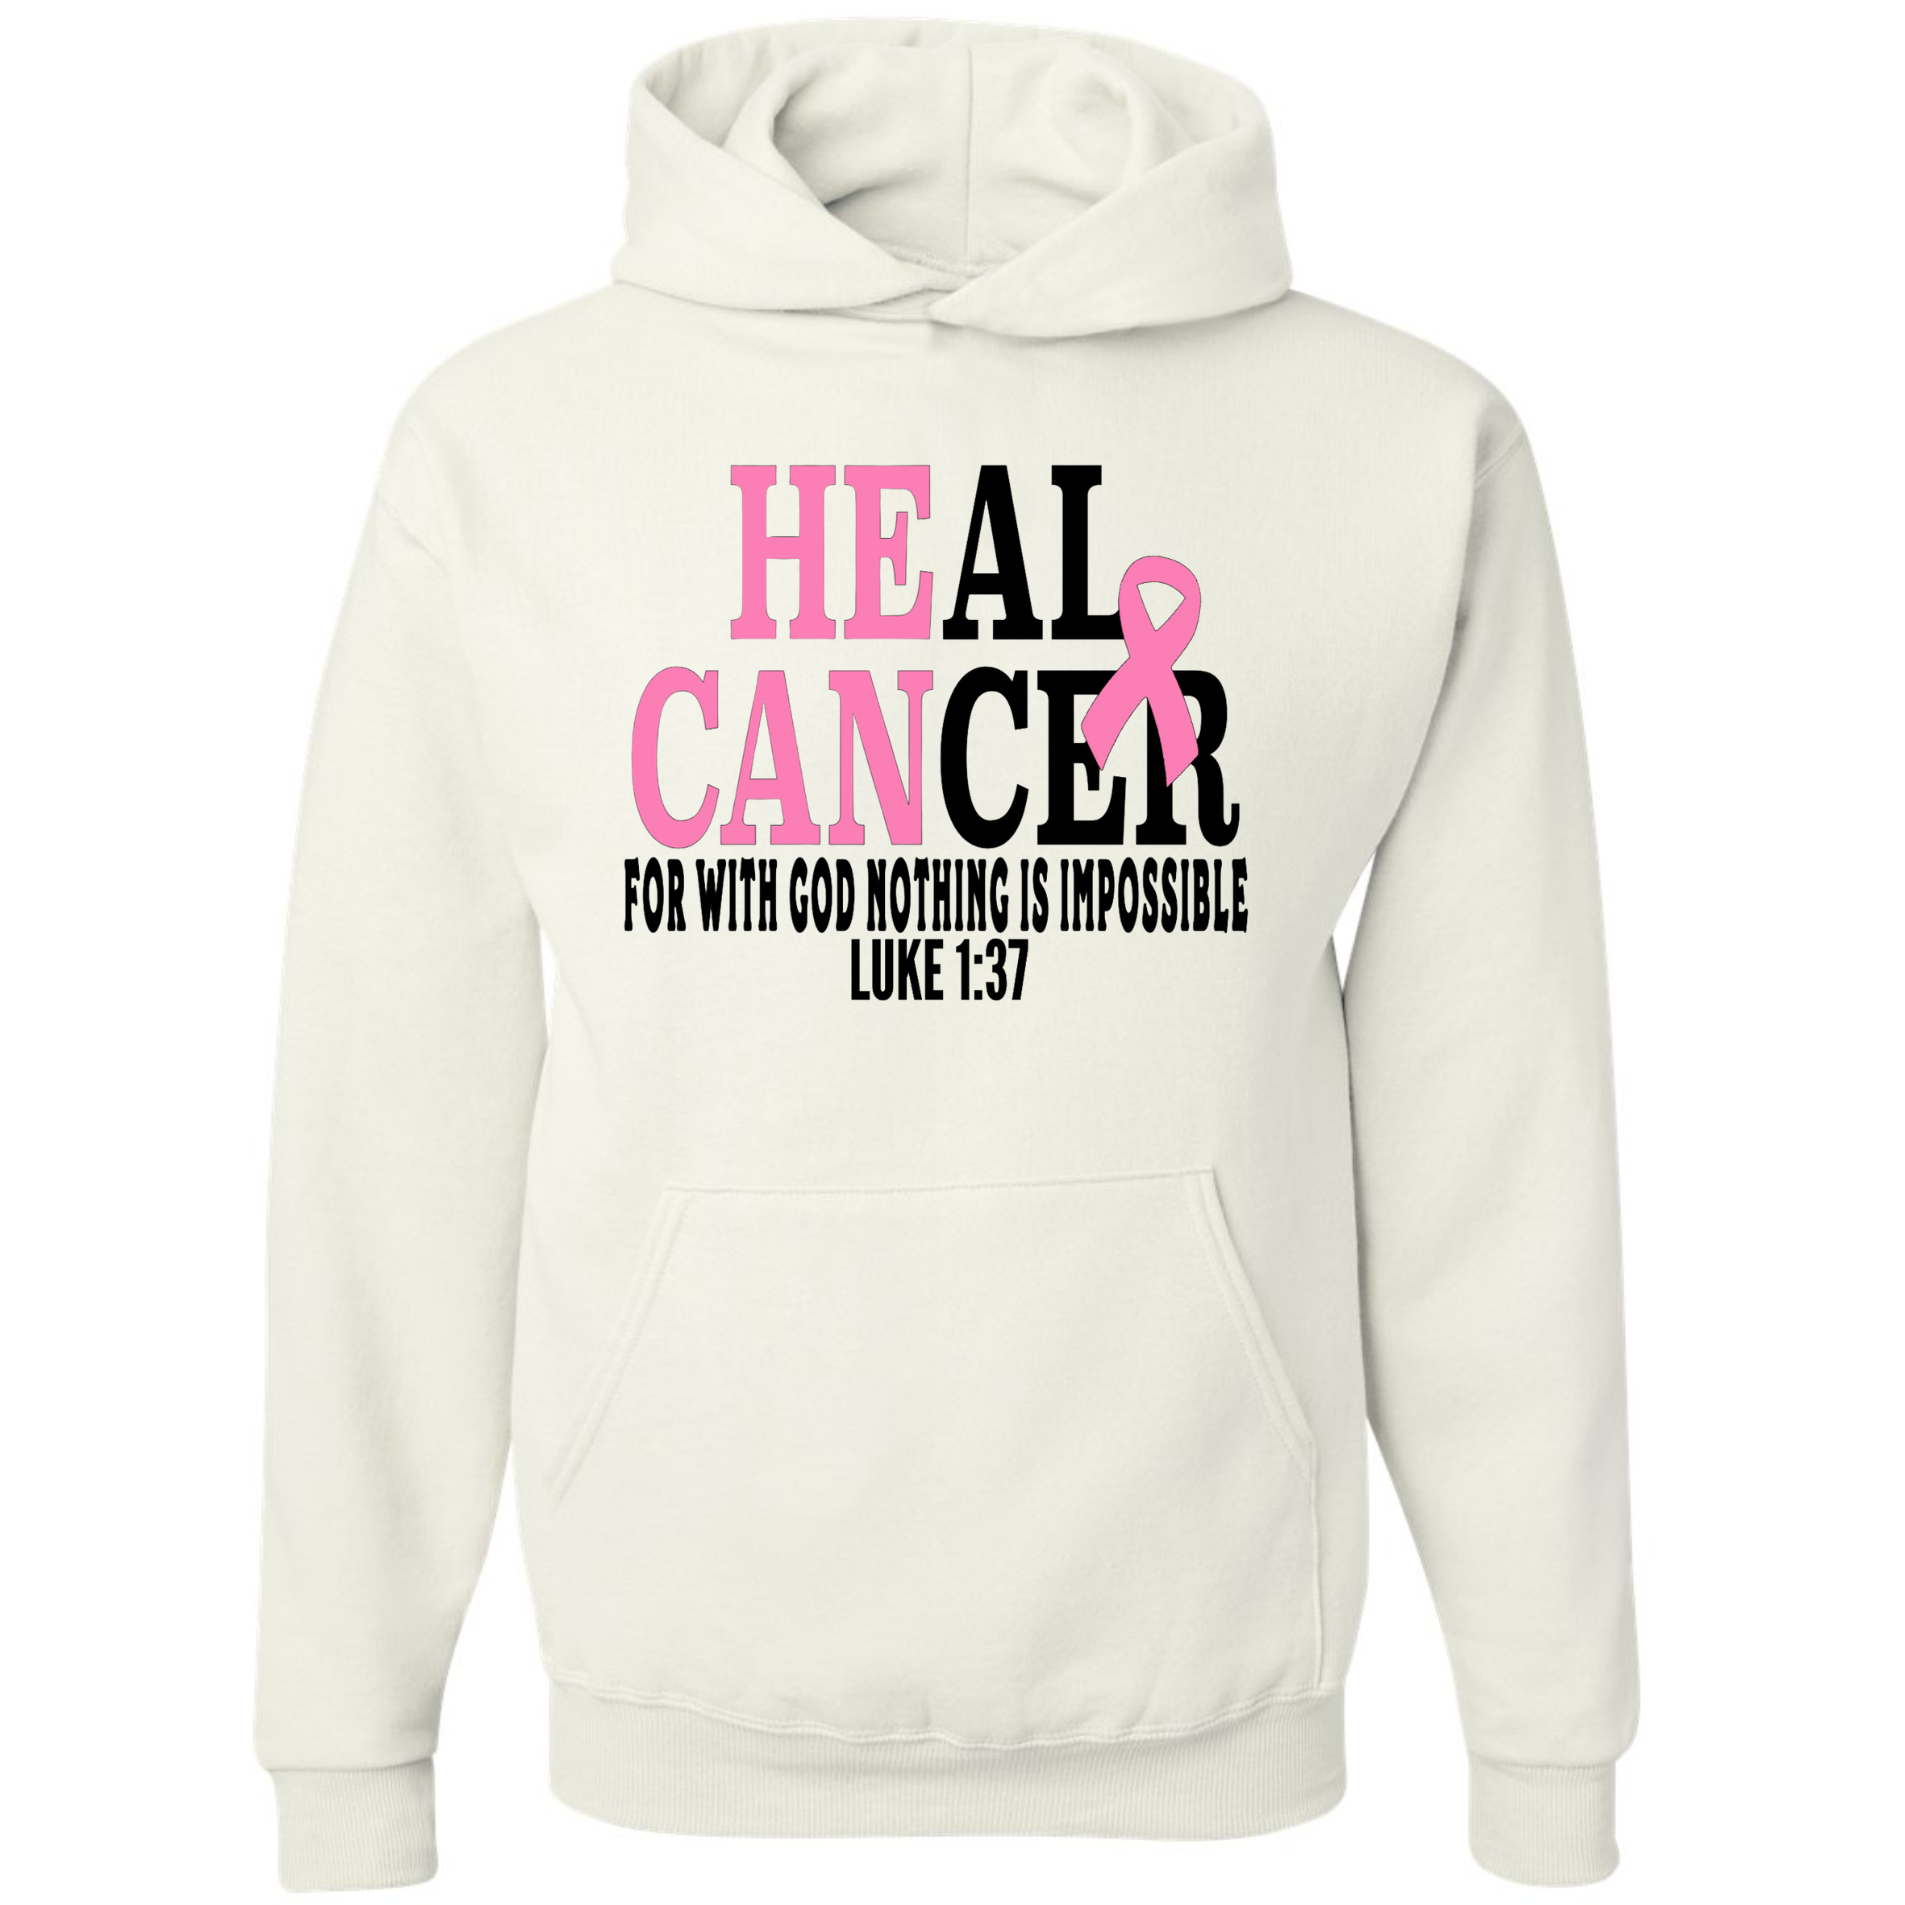 Heal Cancer Awareness Inspirational White Hoodie - Inspire Me Positive